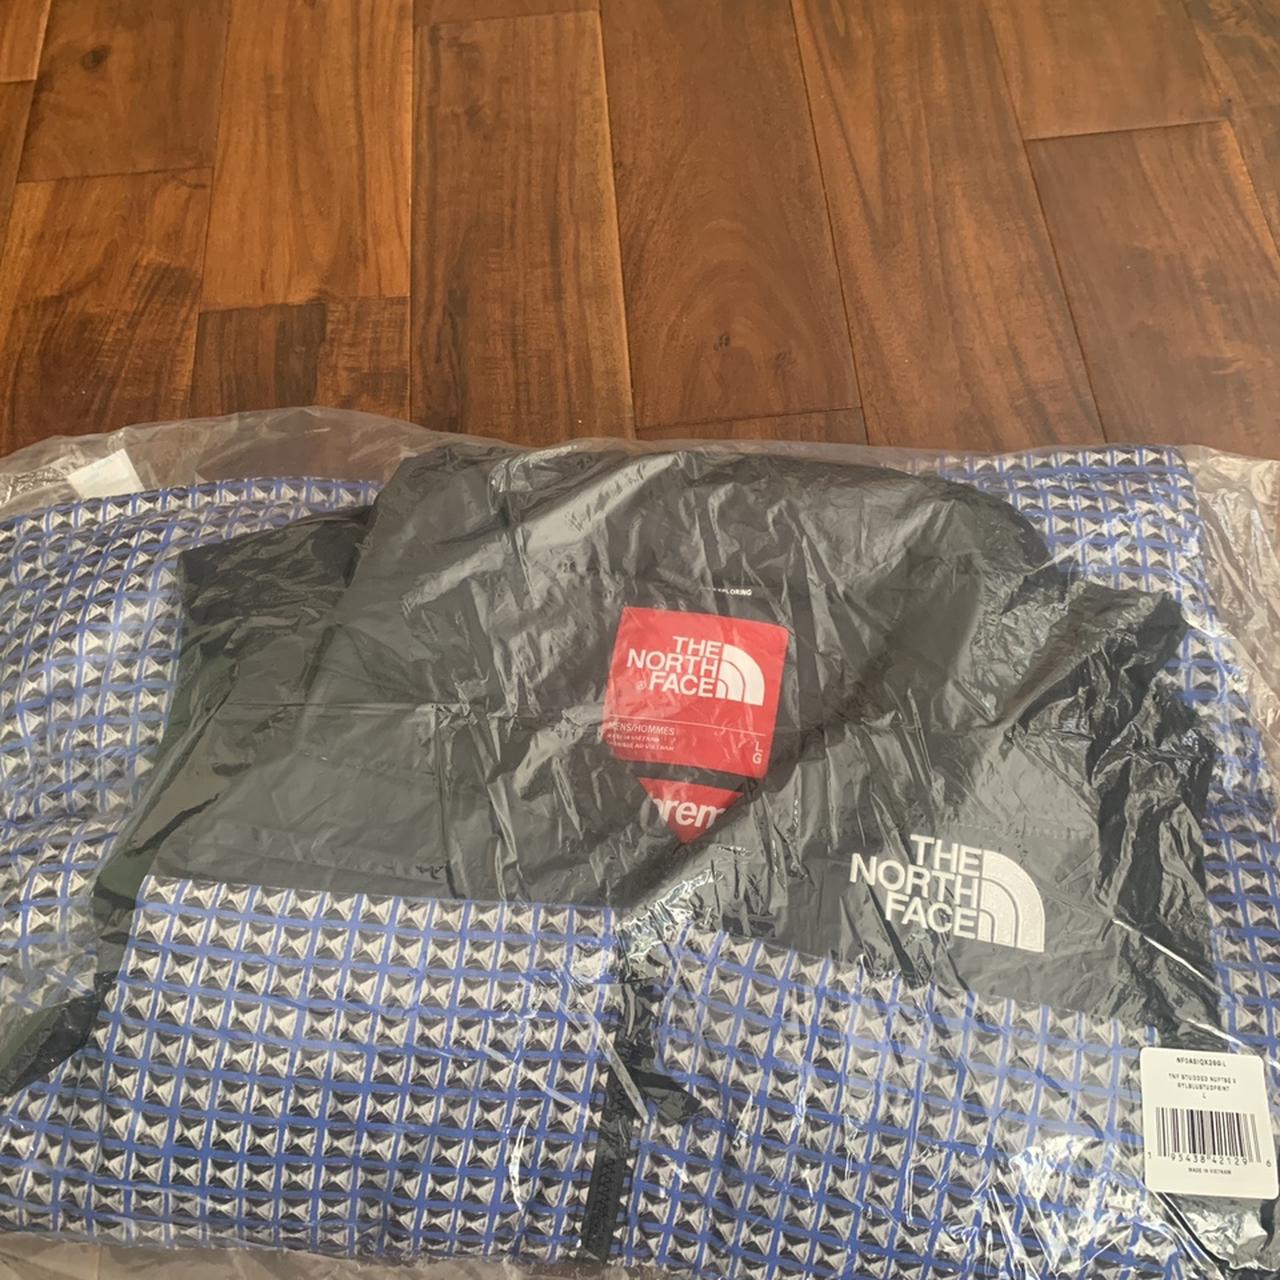 SS21 Supreme x The North Face 'Studded' Mountain Light Jacket